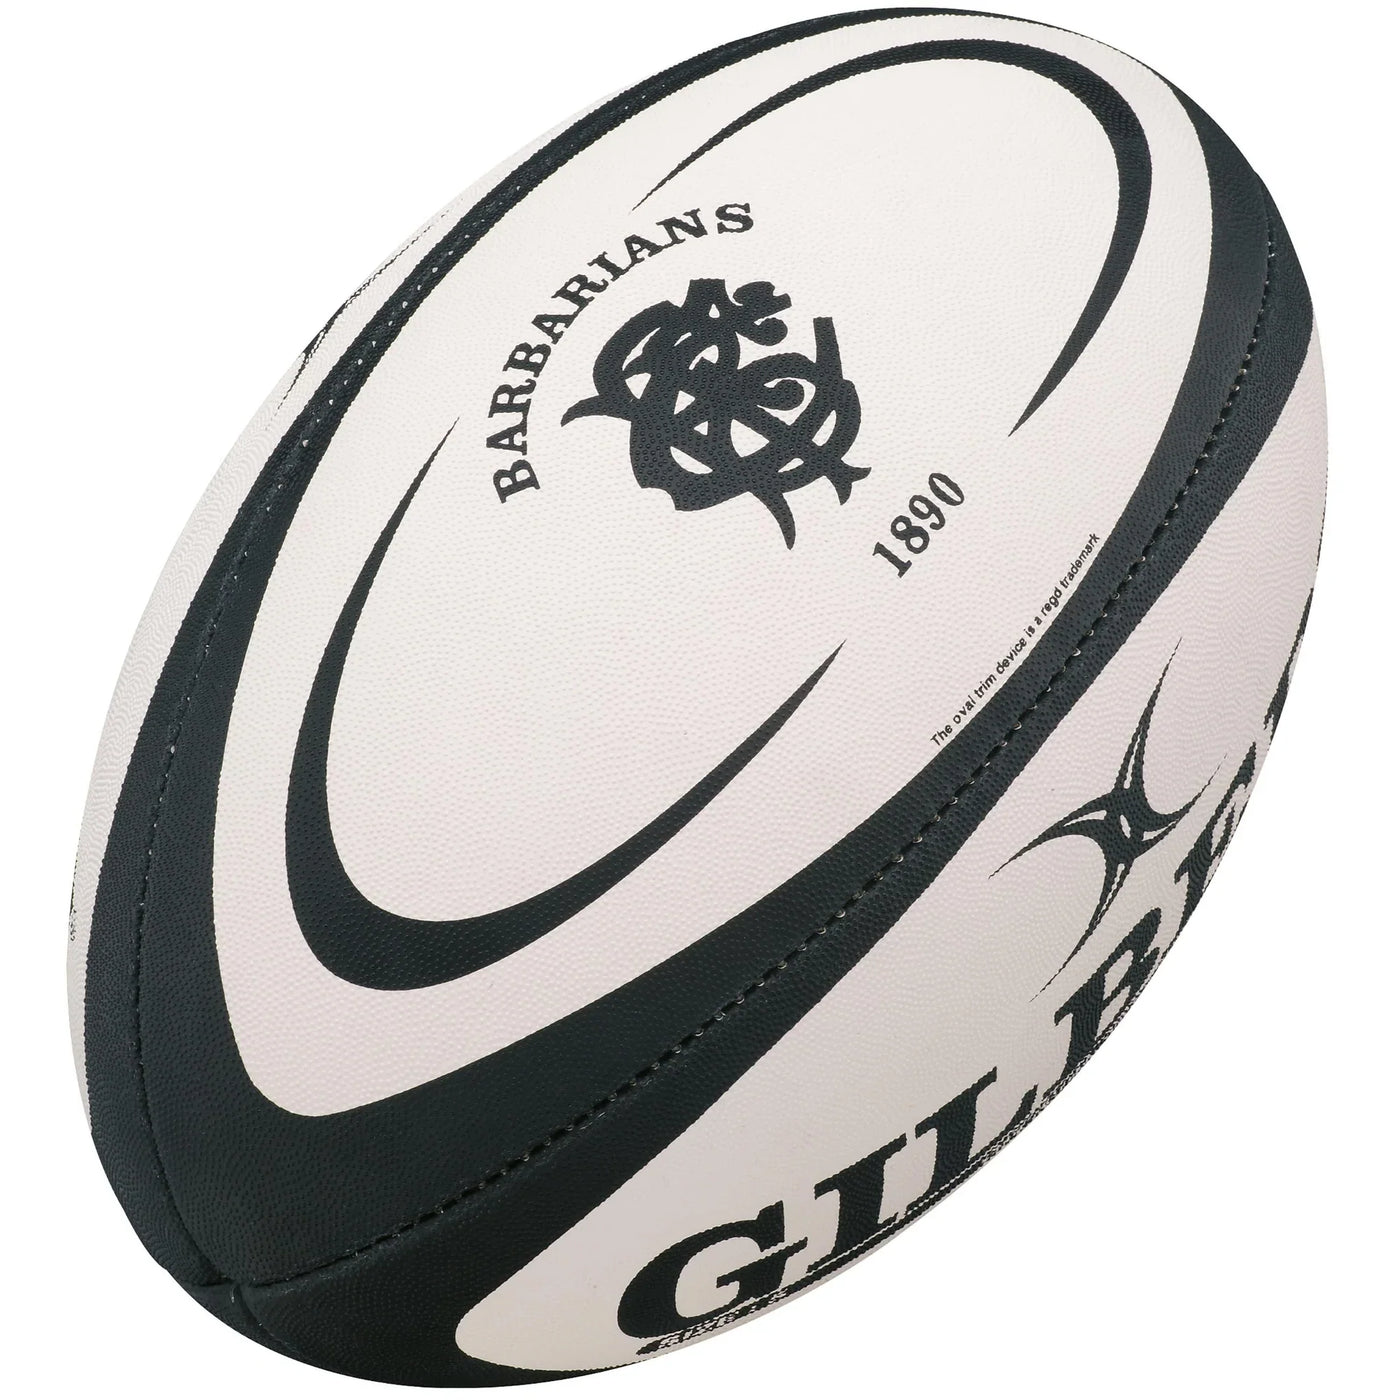 Barbarians Replica Rugby Ball Size 5